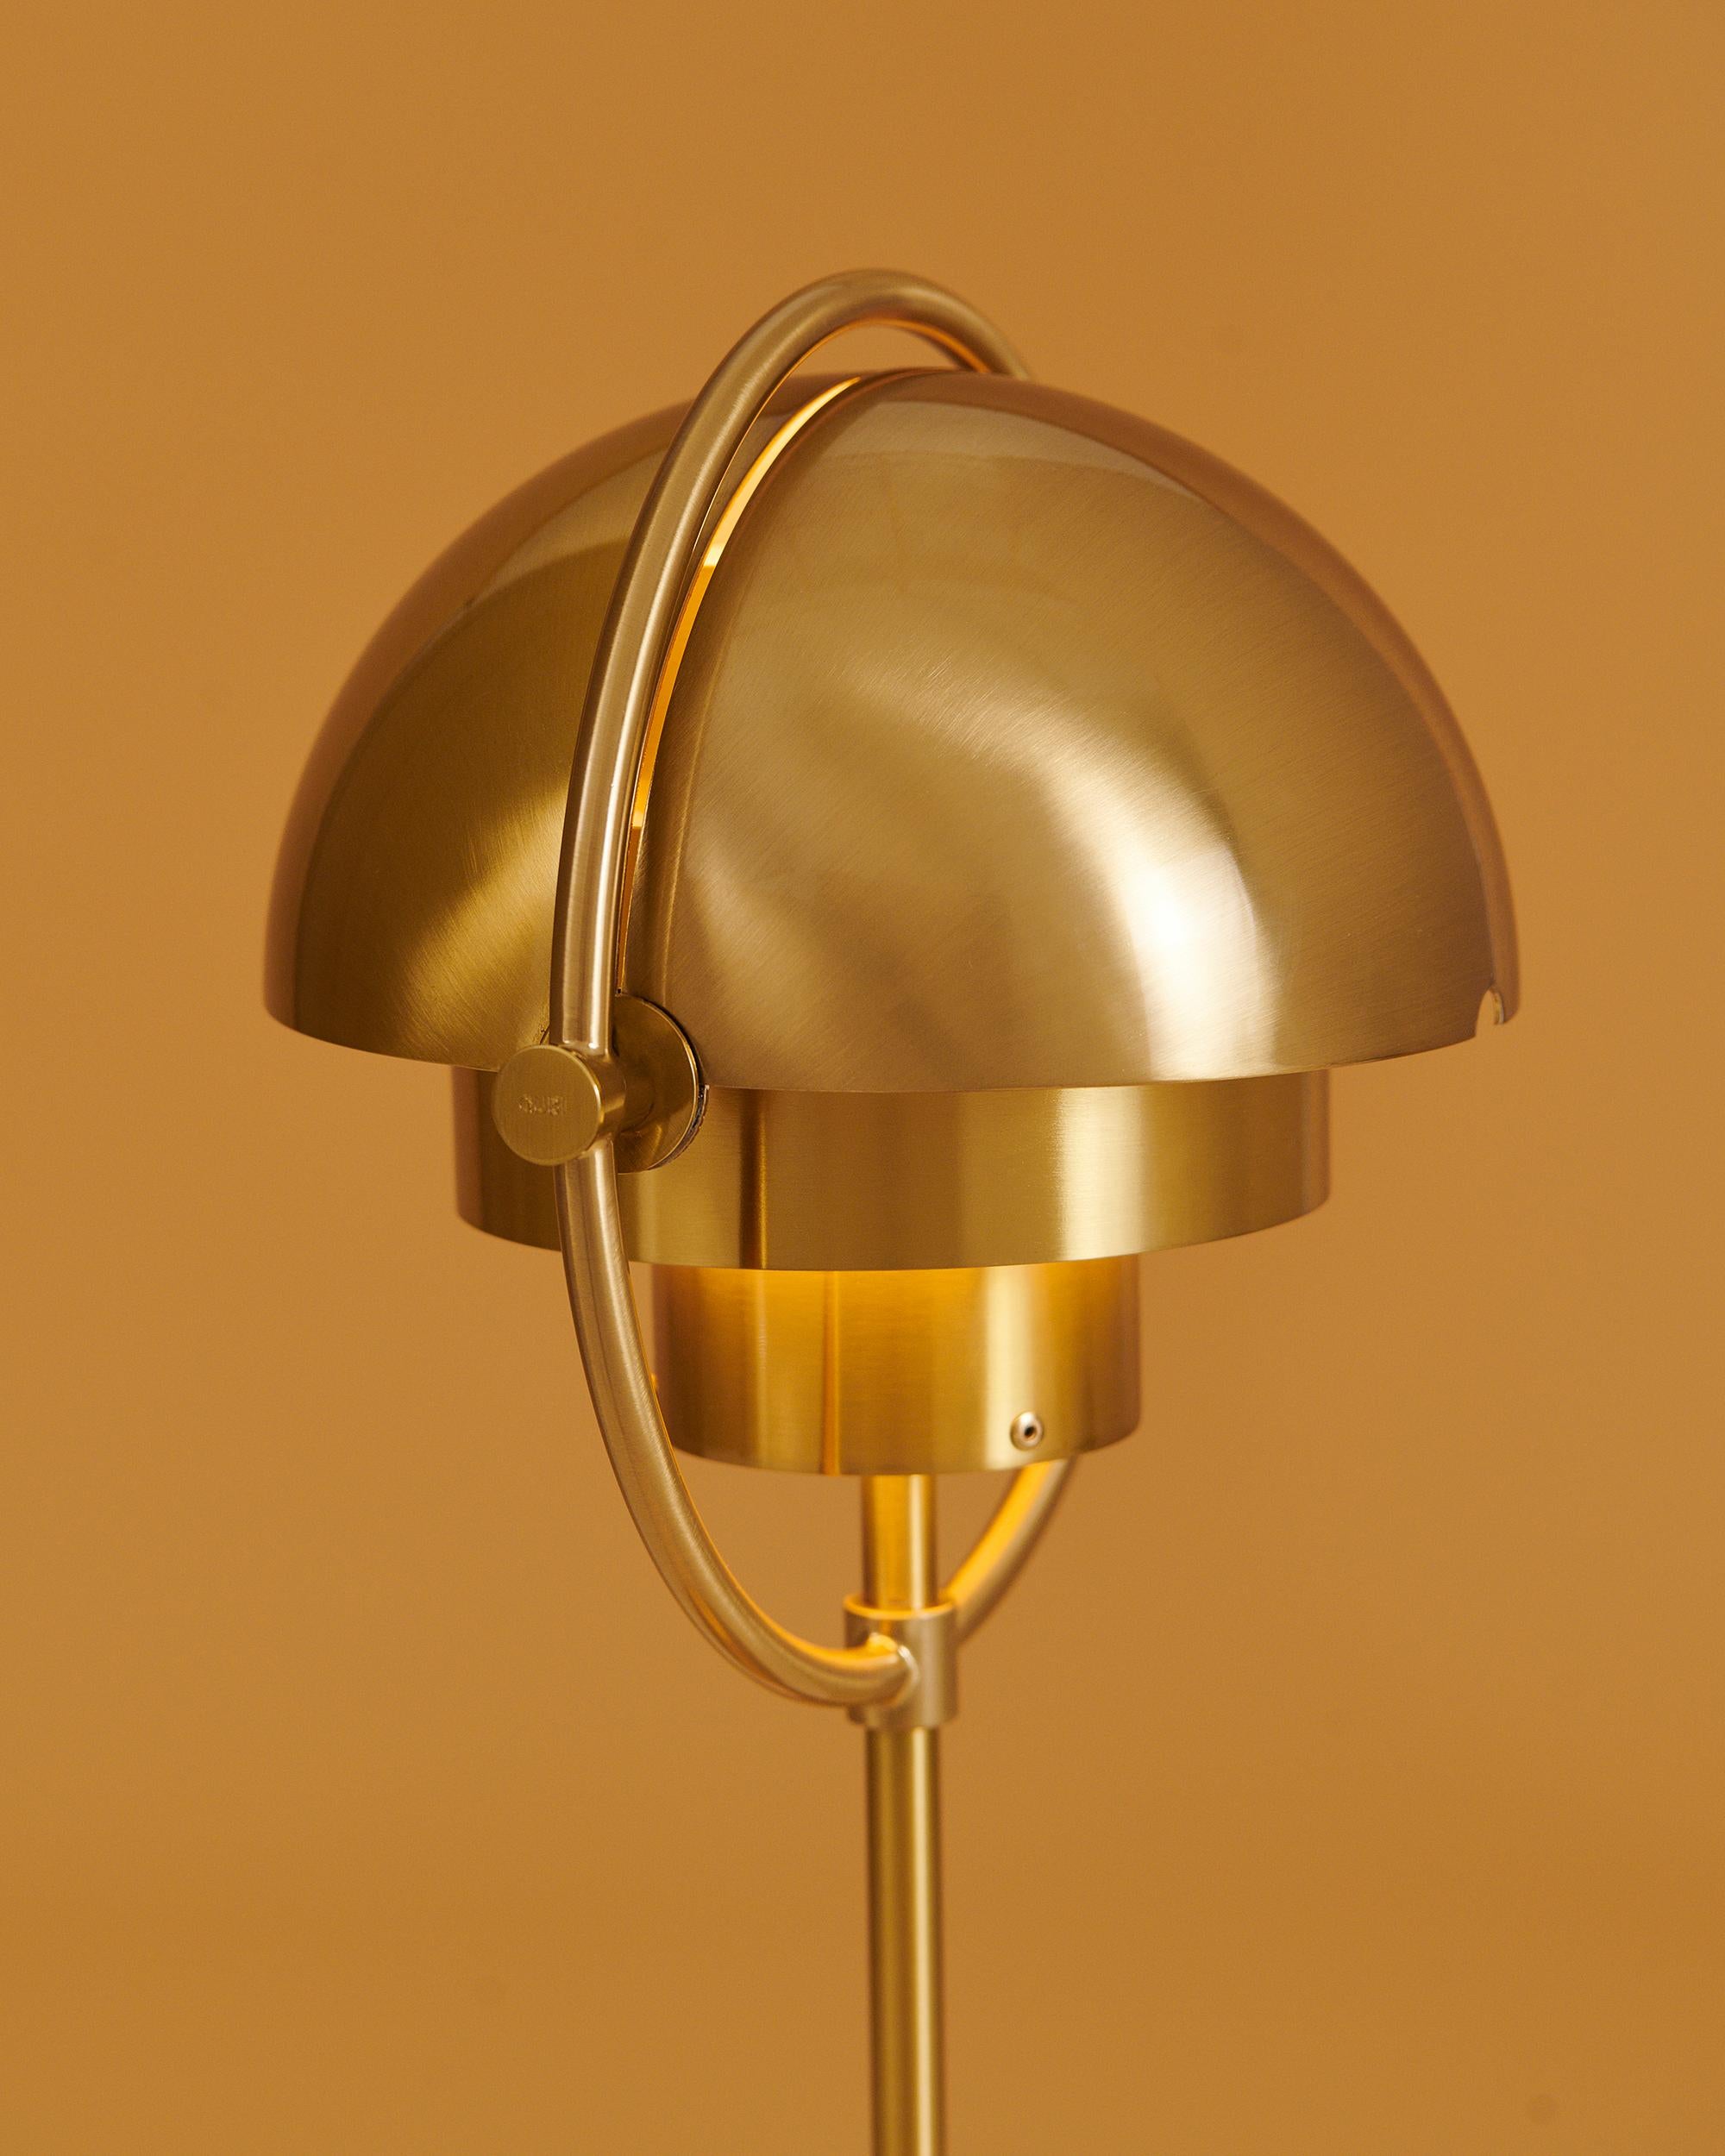 Louis Weisdorf 'Multi-Lite' Portable Table Lamp in Brass.

Designed in 1972 by Weisdorf, this new portable version of Weisdorf's iconic design was created by GUBI of Denmark, who meticulously reproduce his work with scrupulous attention to detail